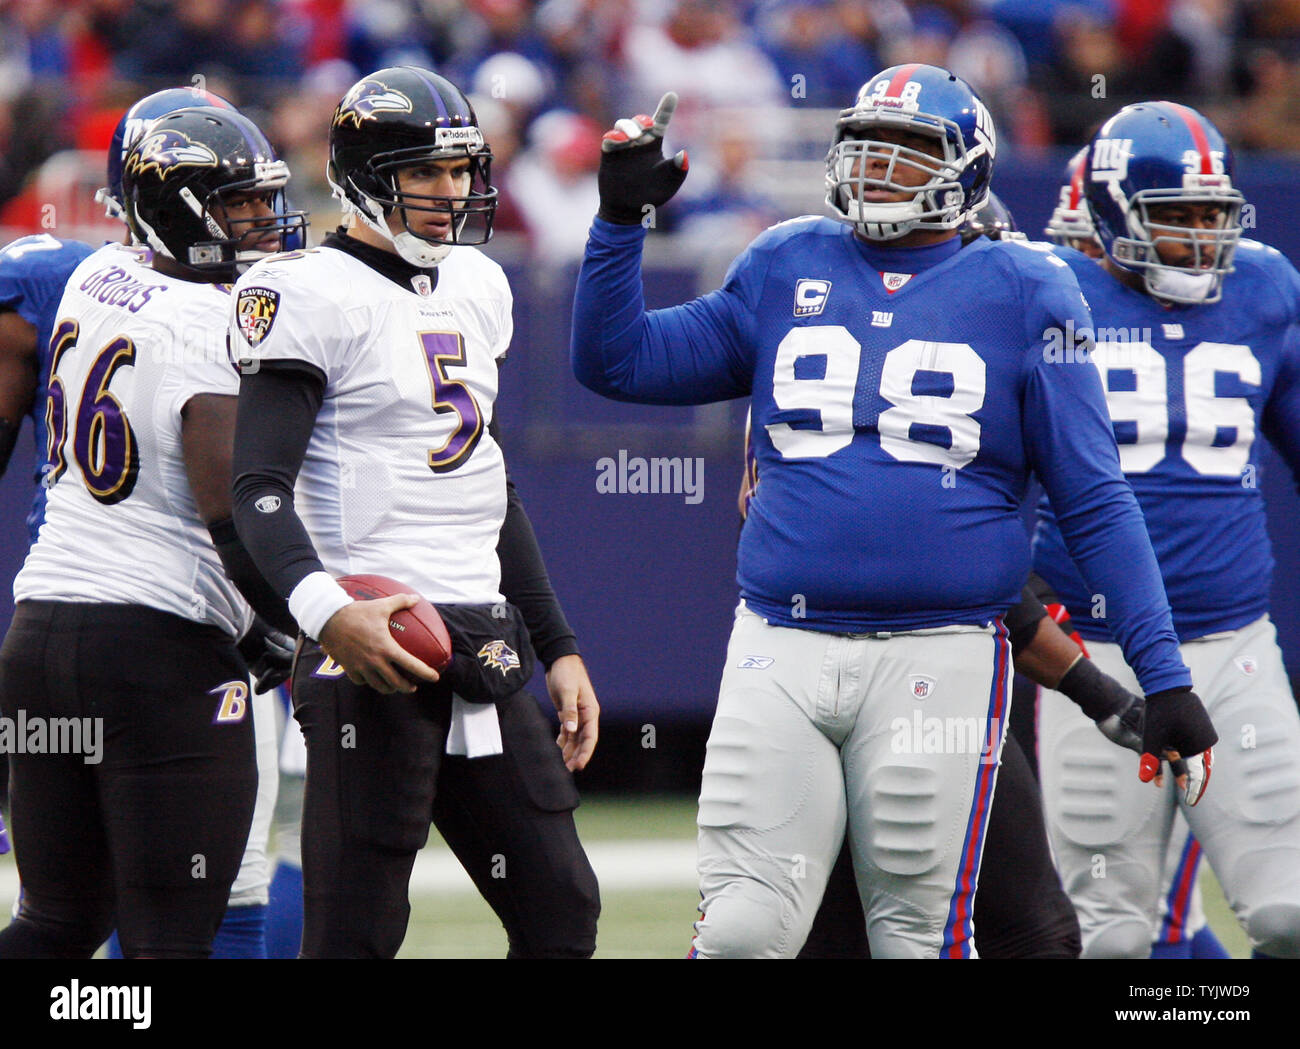 Baltimore Ravens Joe Flacco (5) watches New York Giants Fred Robbins (98)  react in the first quarter at Giants Stadium in East Rutherford, New Jersey  on November16, 2008. (UPI Photo/John Angelillo Stock